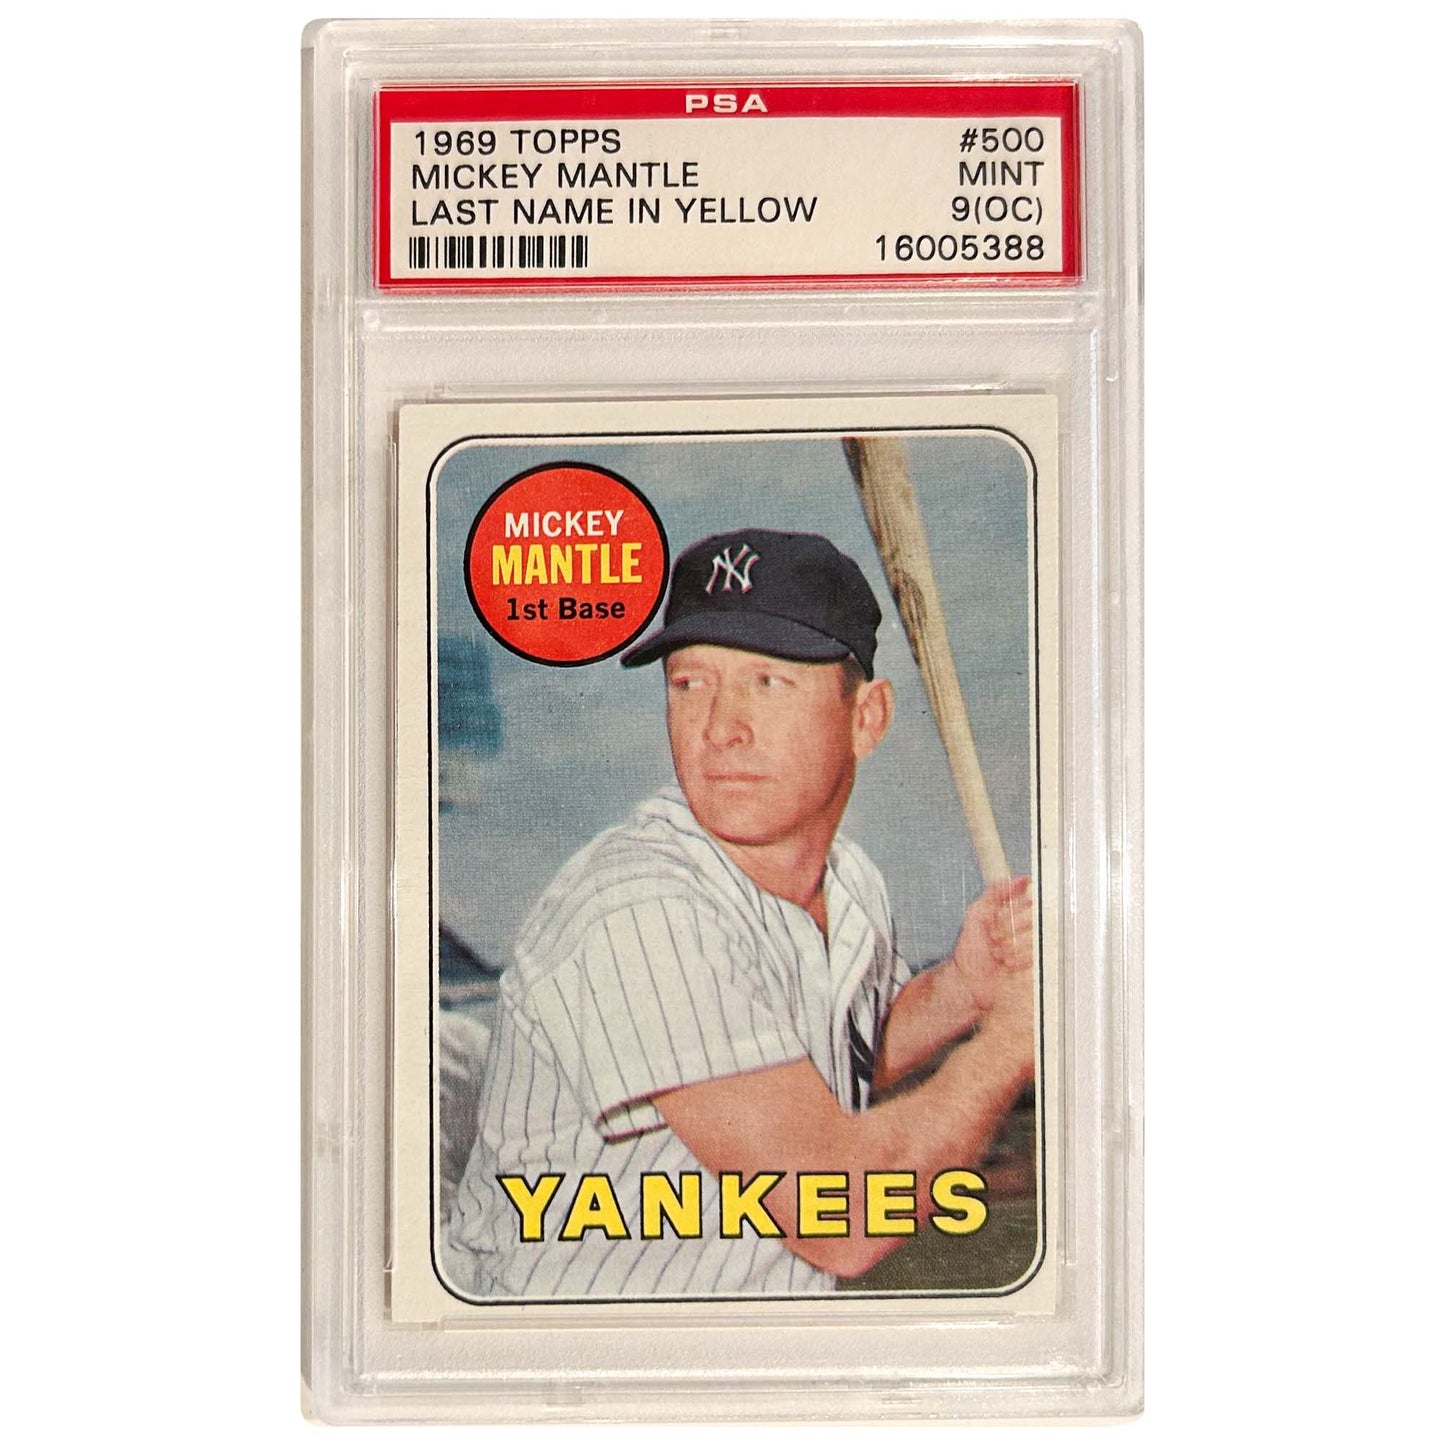 1969 Topps Mickey Mantle Card Graded PSA Front